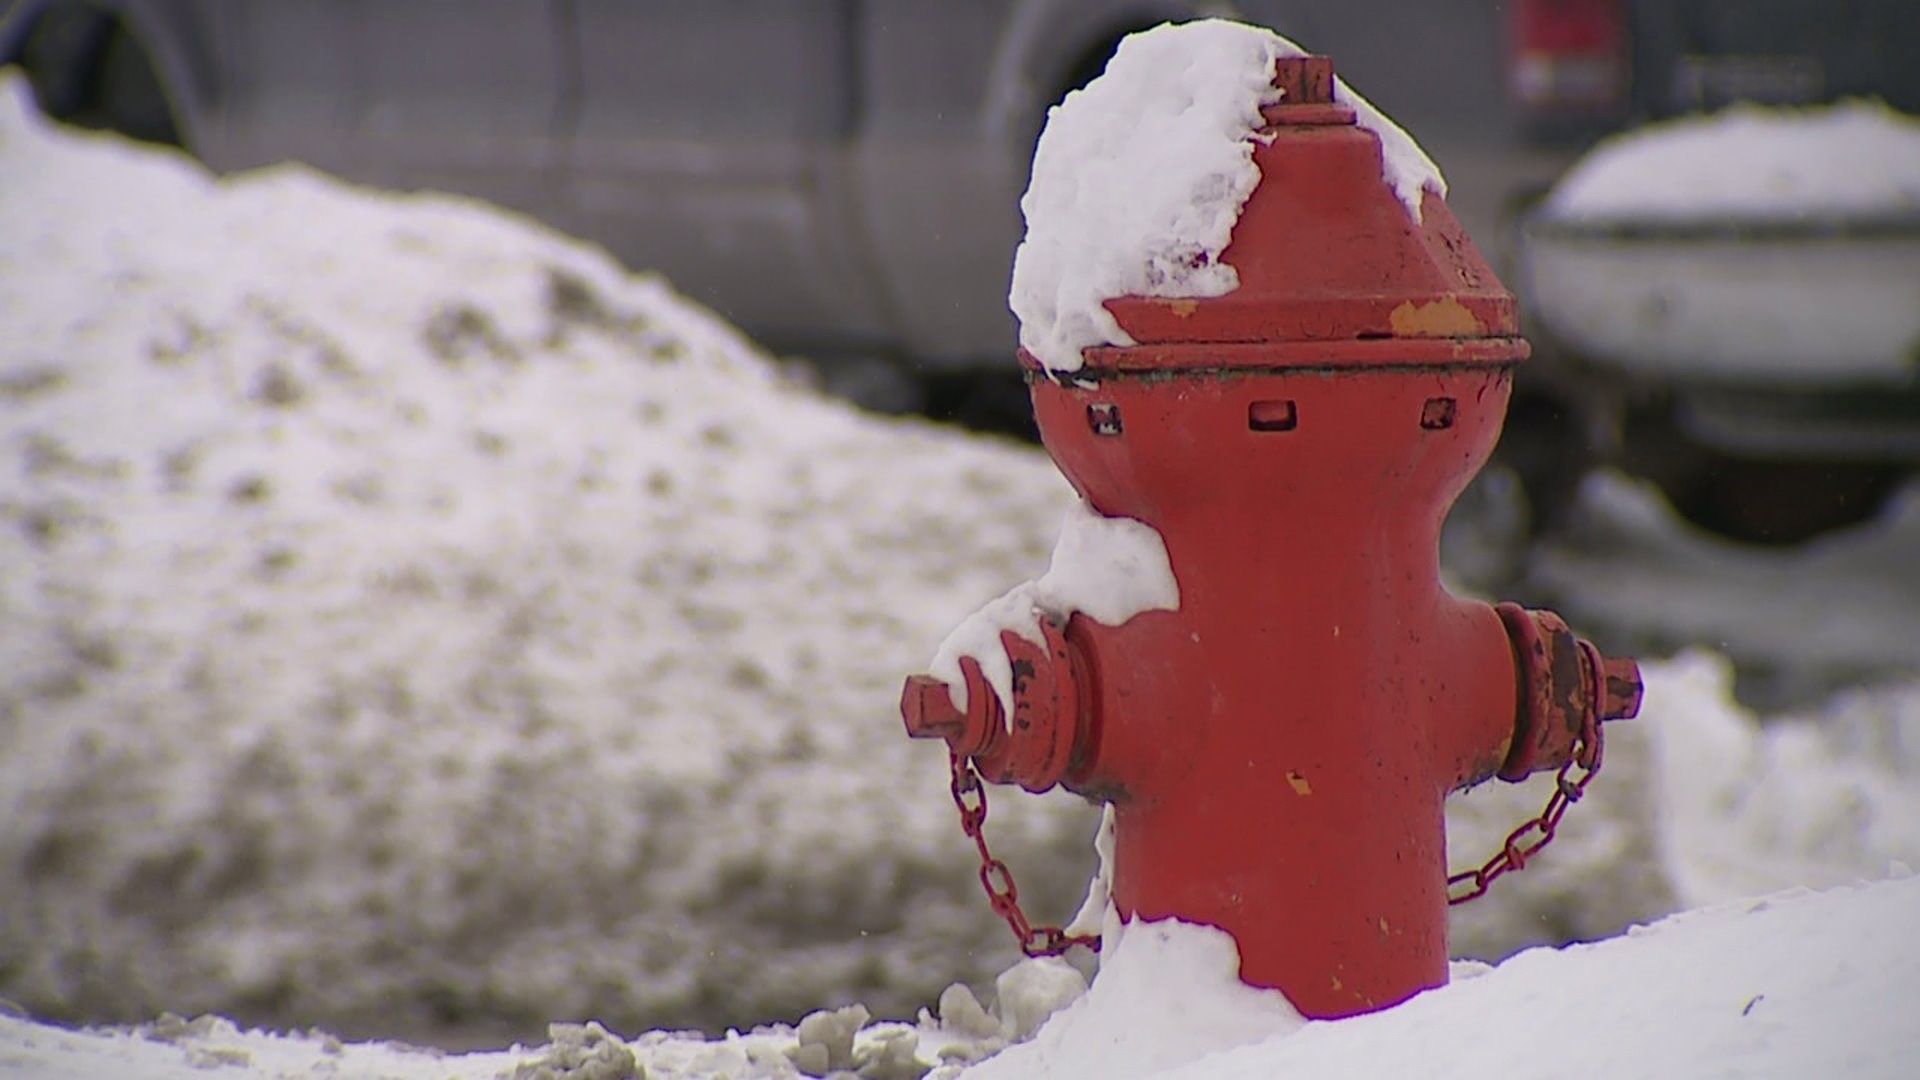 Keeping your fire hydrants clear